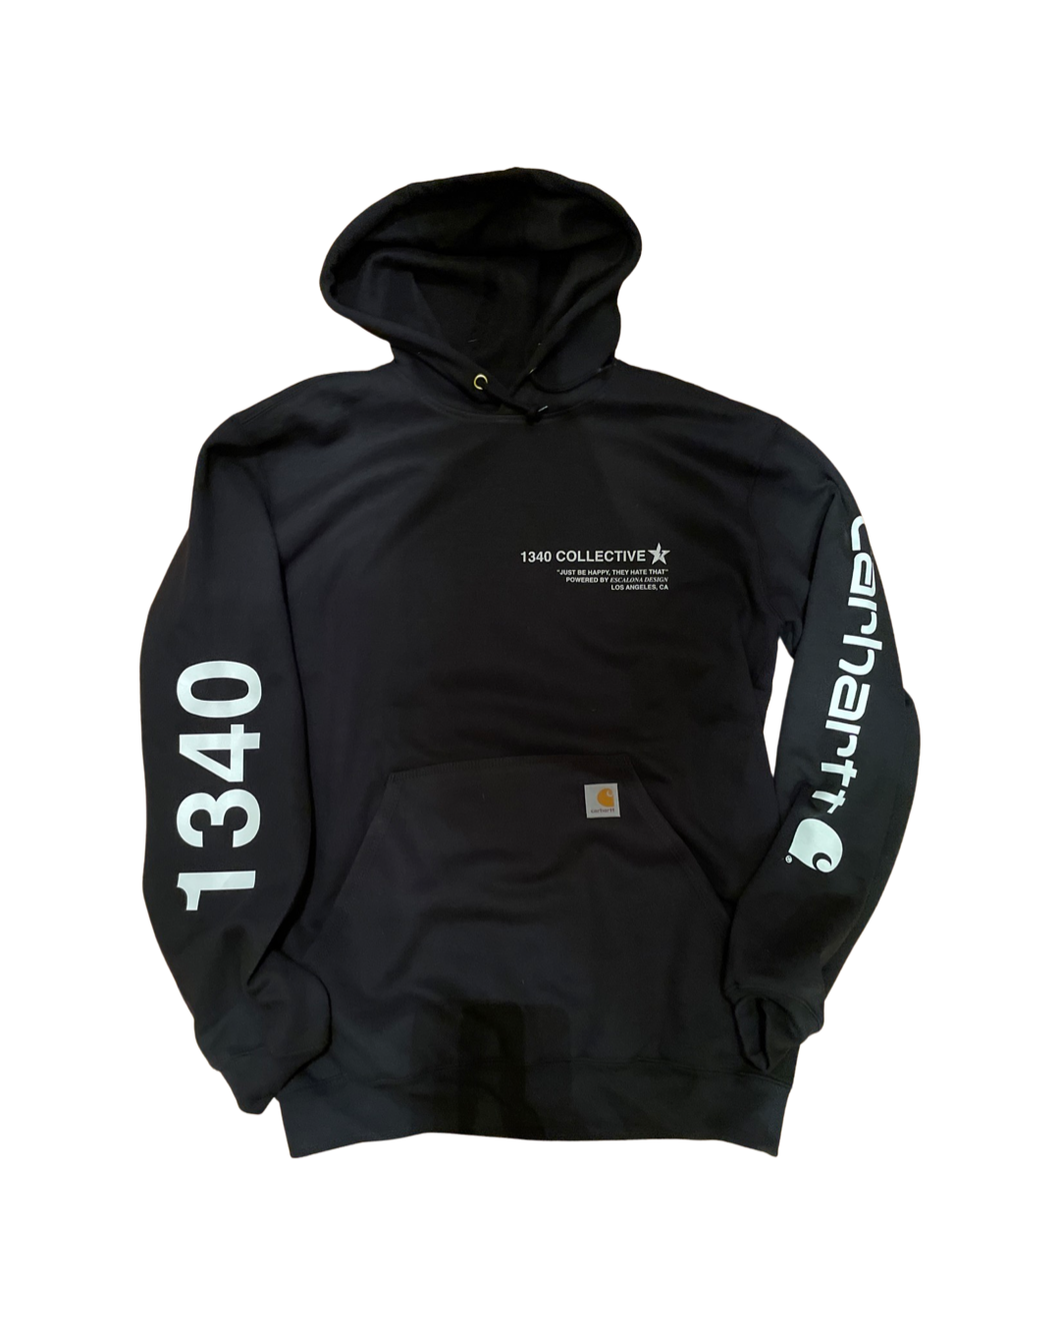 1340 JUST BE HAPPY THEY HATE THAT LOGO SLEEVE - HOODIE (Black Friday 2022)